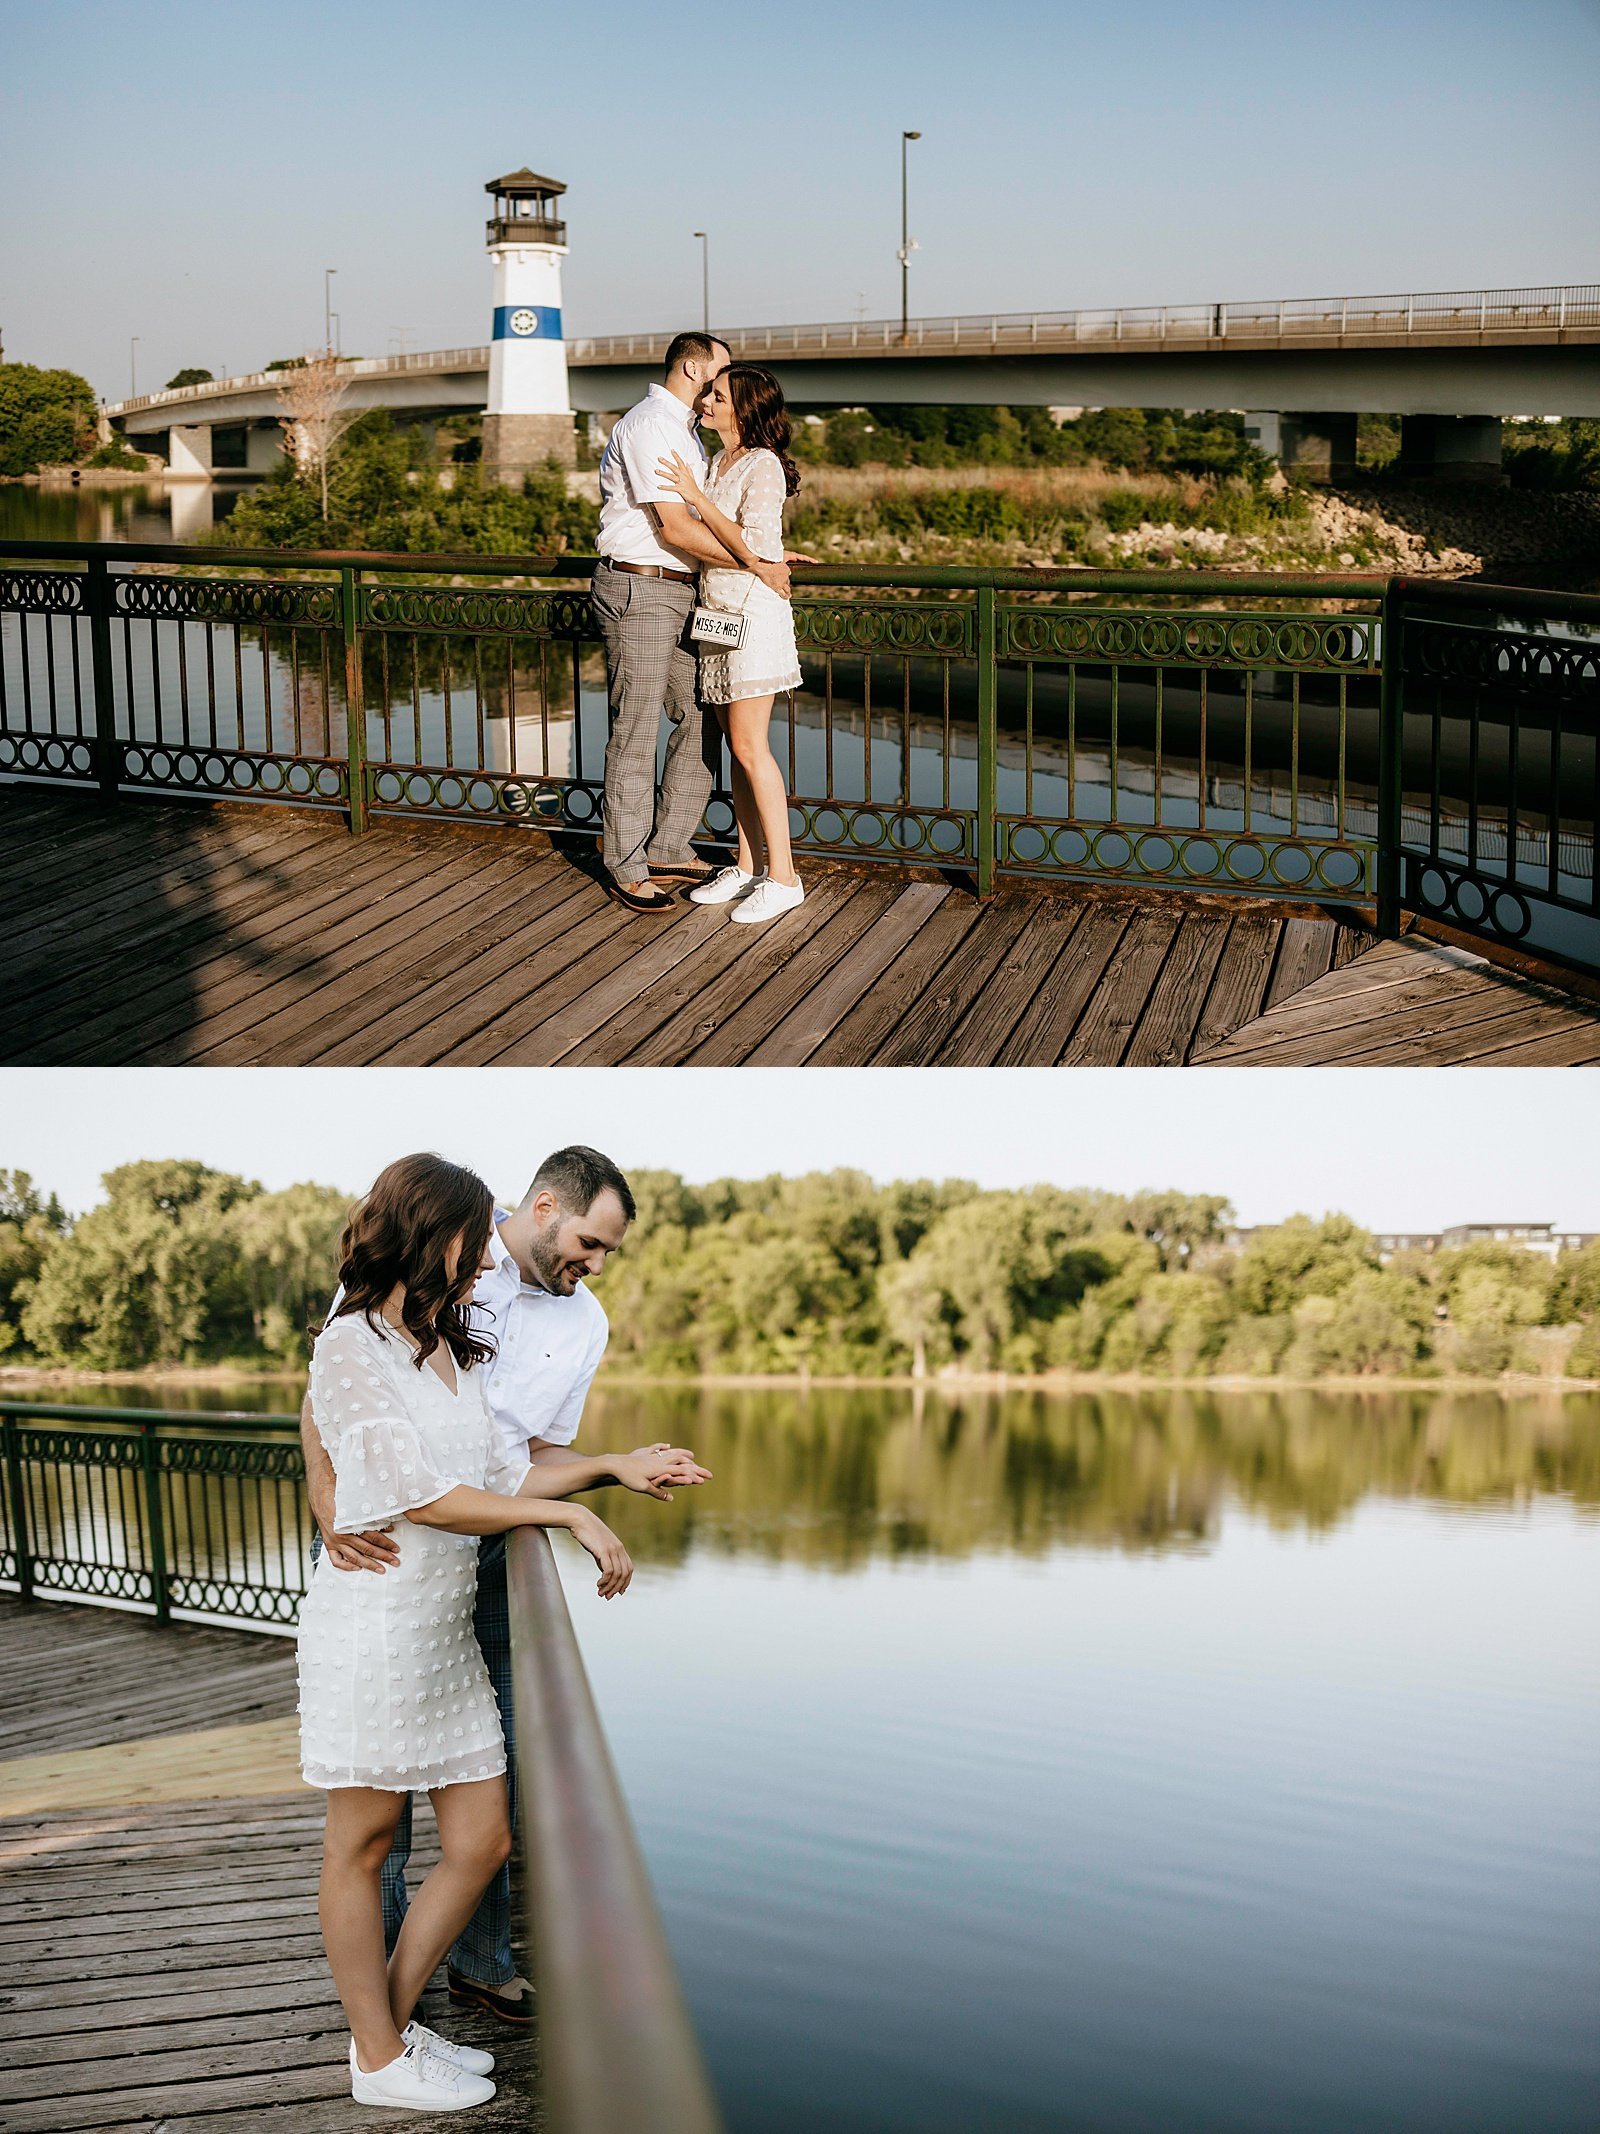  Man and woman leaning over a railing looking over water for Minnesota photo shoot.  